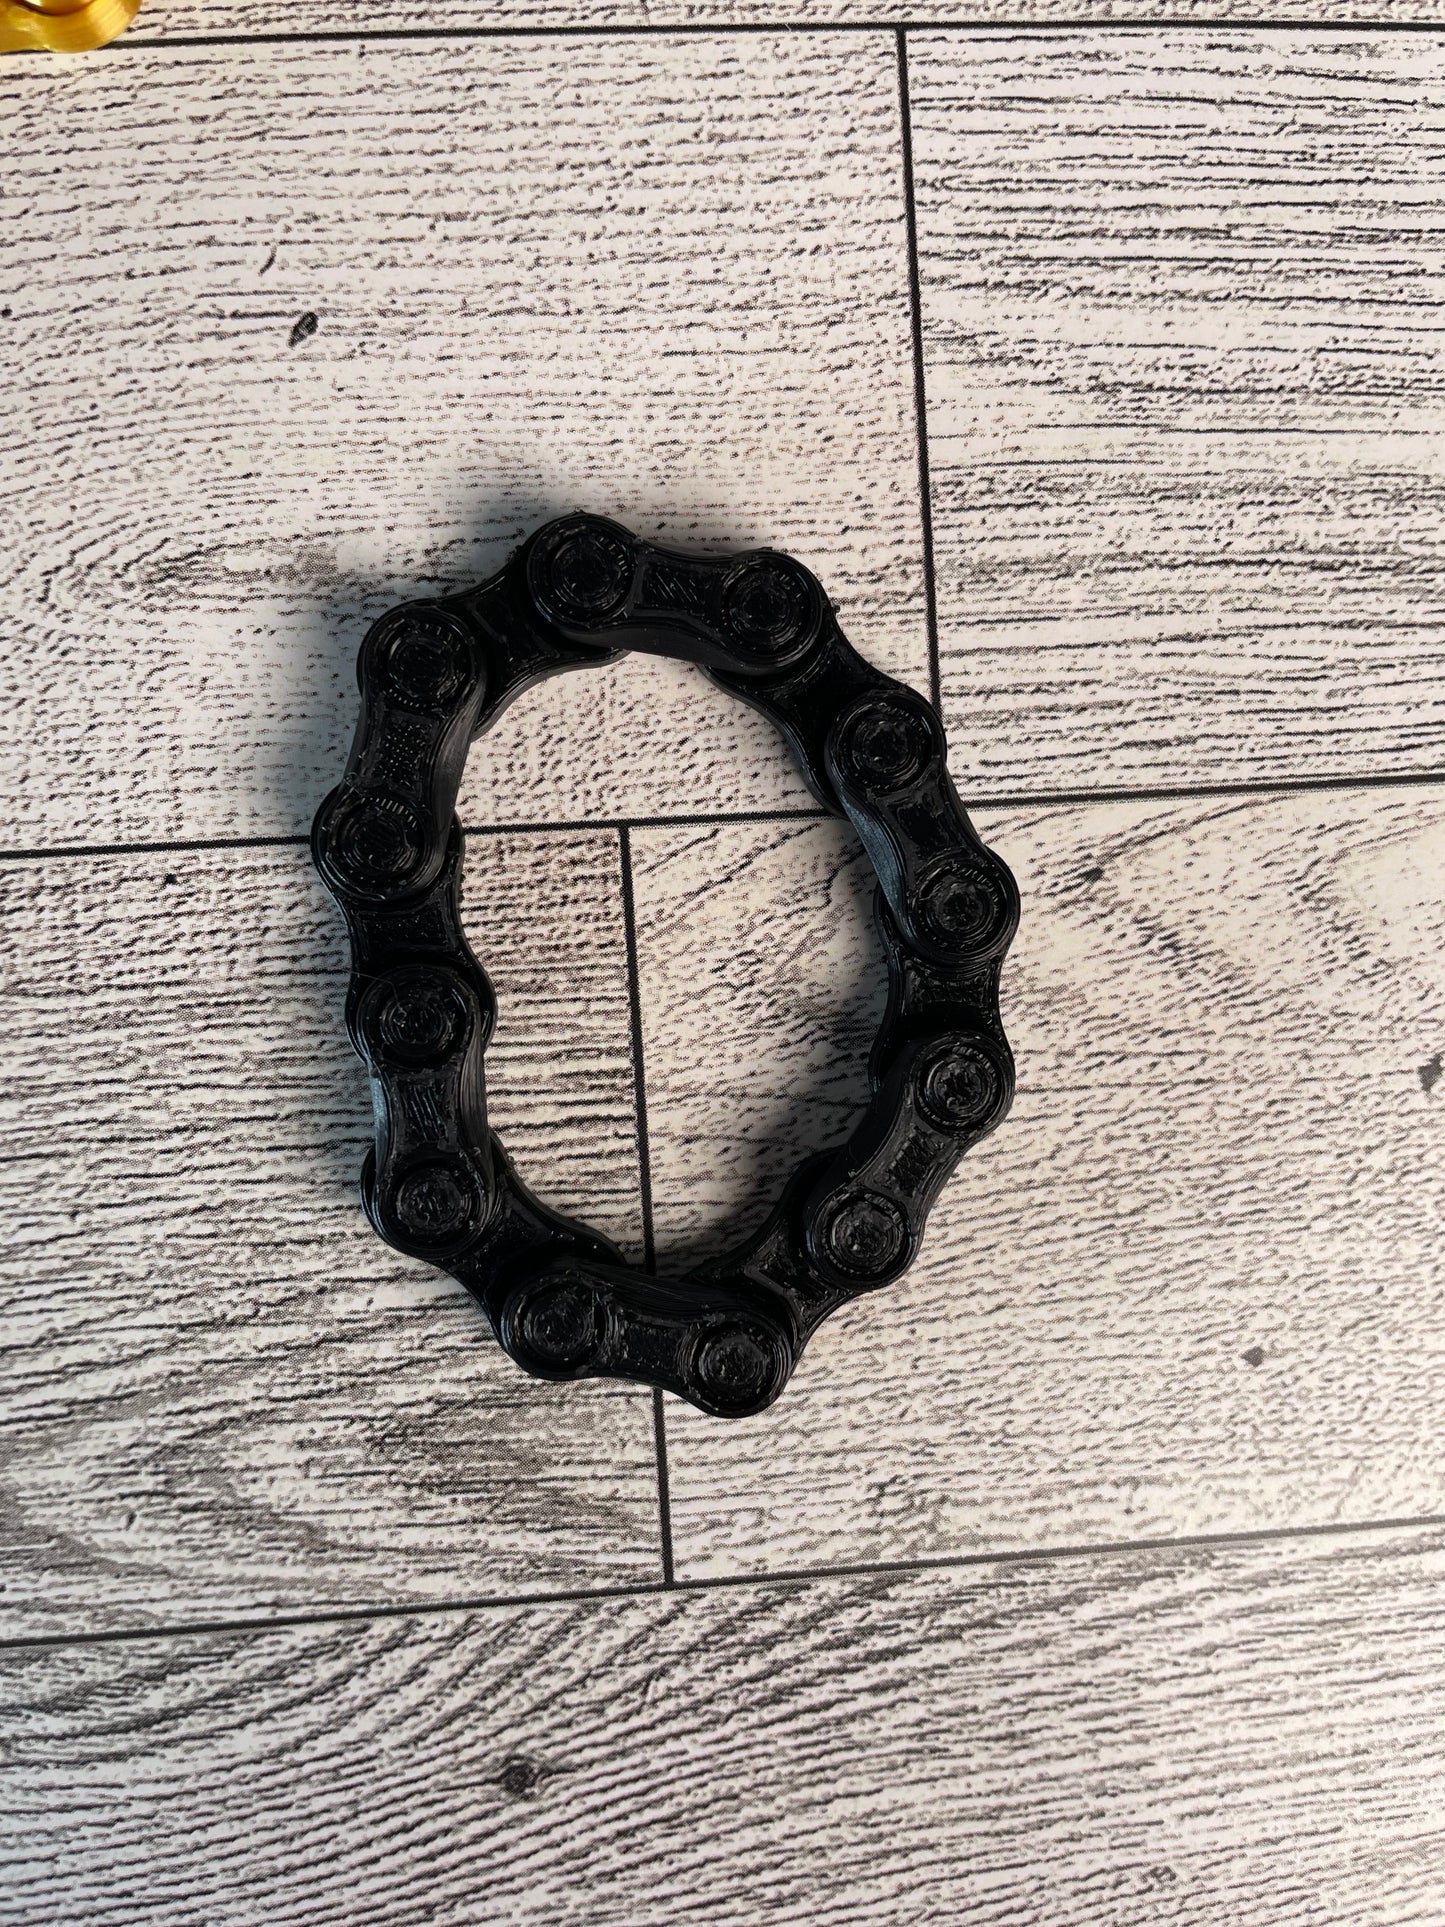 A black chain link on a wood backdrop. The chain is arranged in a oval shape and there are six links.